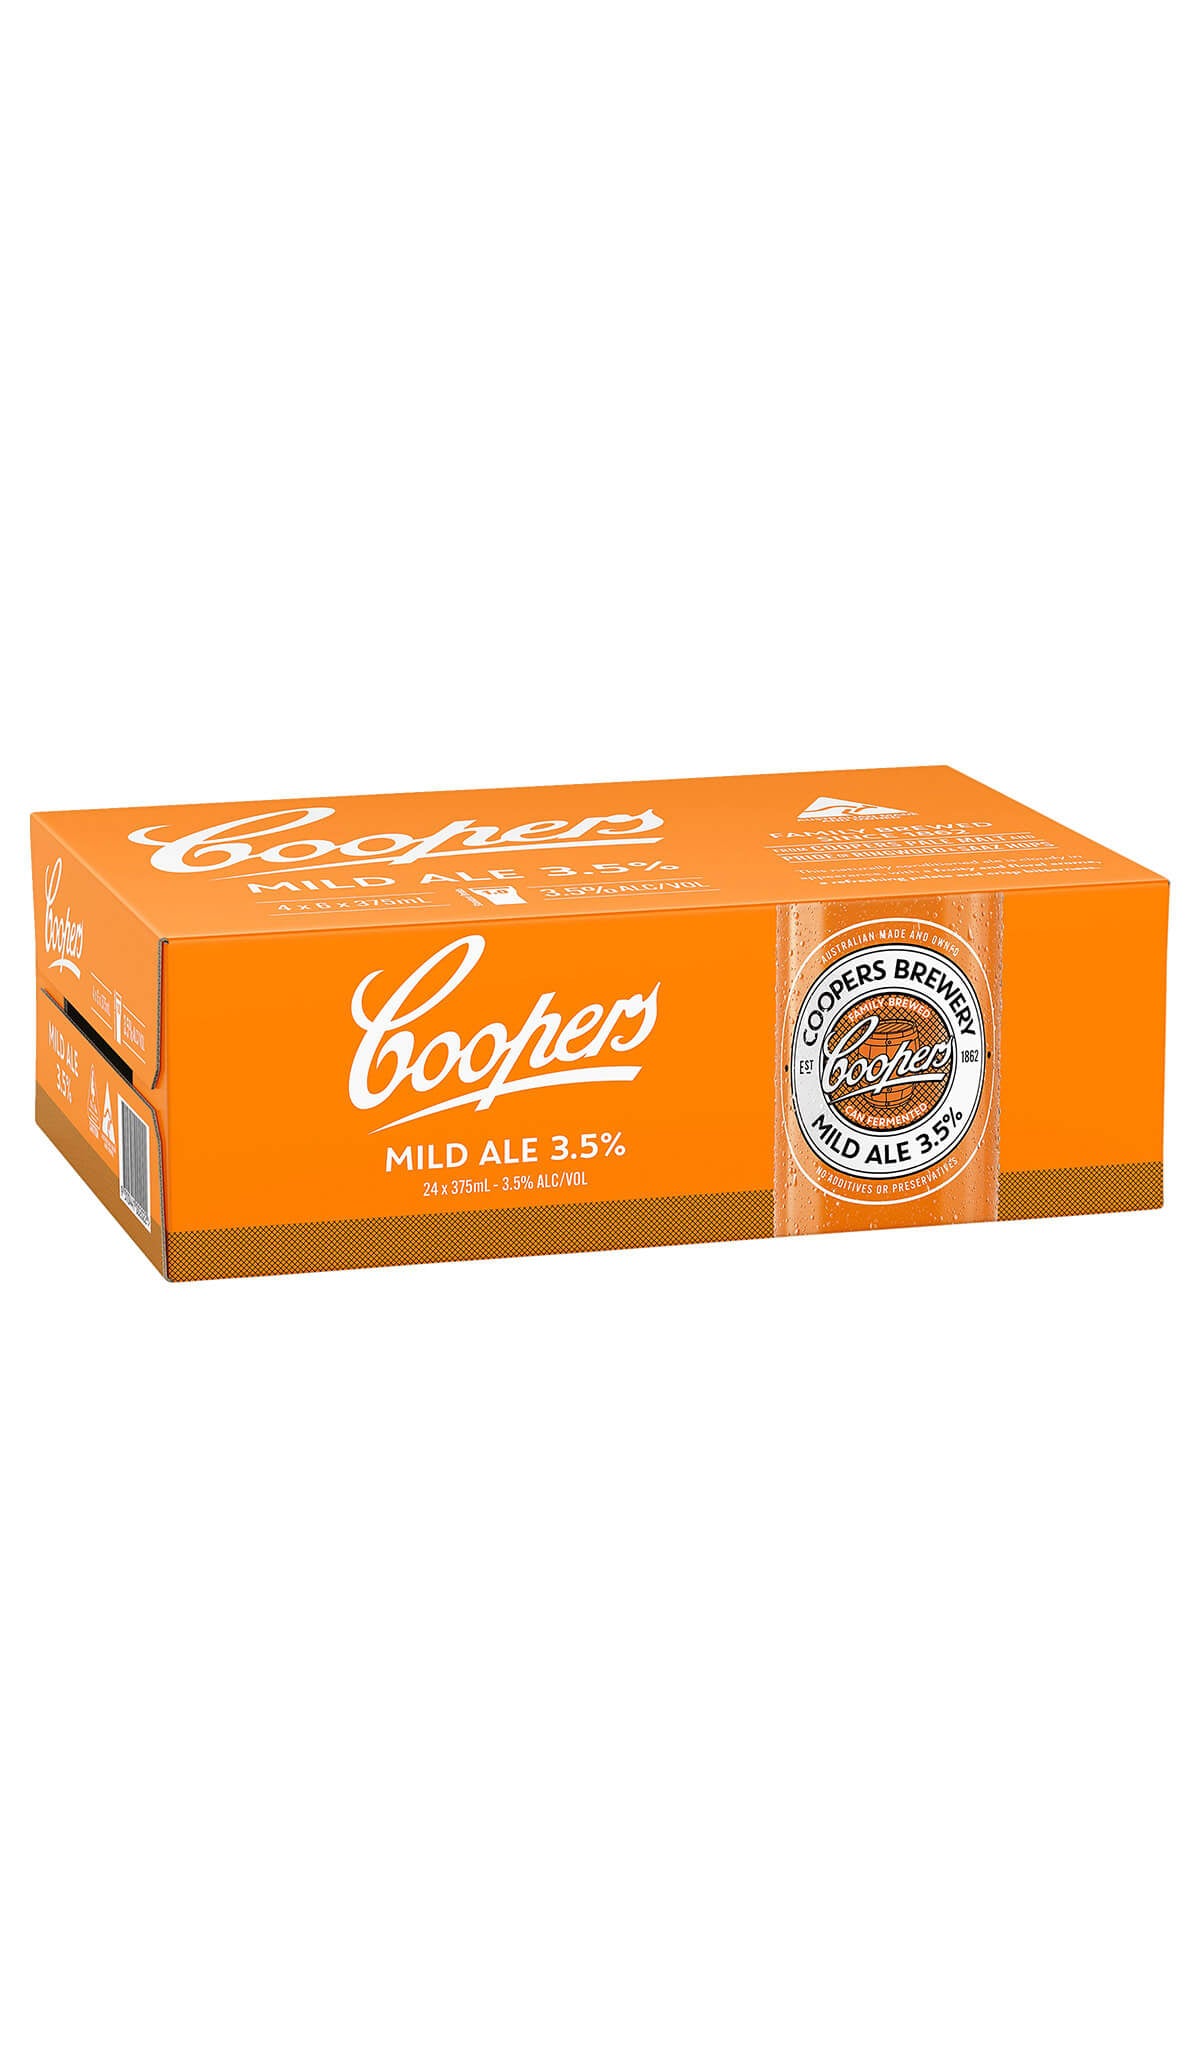 Find out more, explore the range and purchase Coopers Mild Ale 24x375mL Cans online at Wine Sellers Direct - Australia's independent liquor specialists.